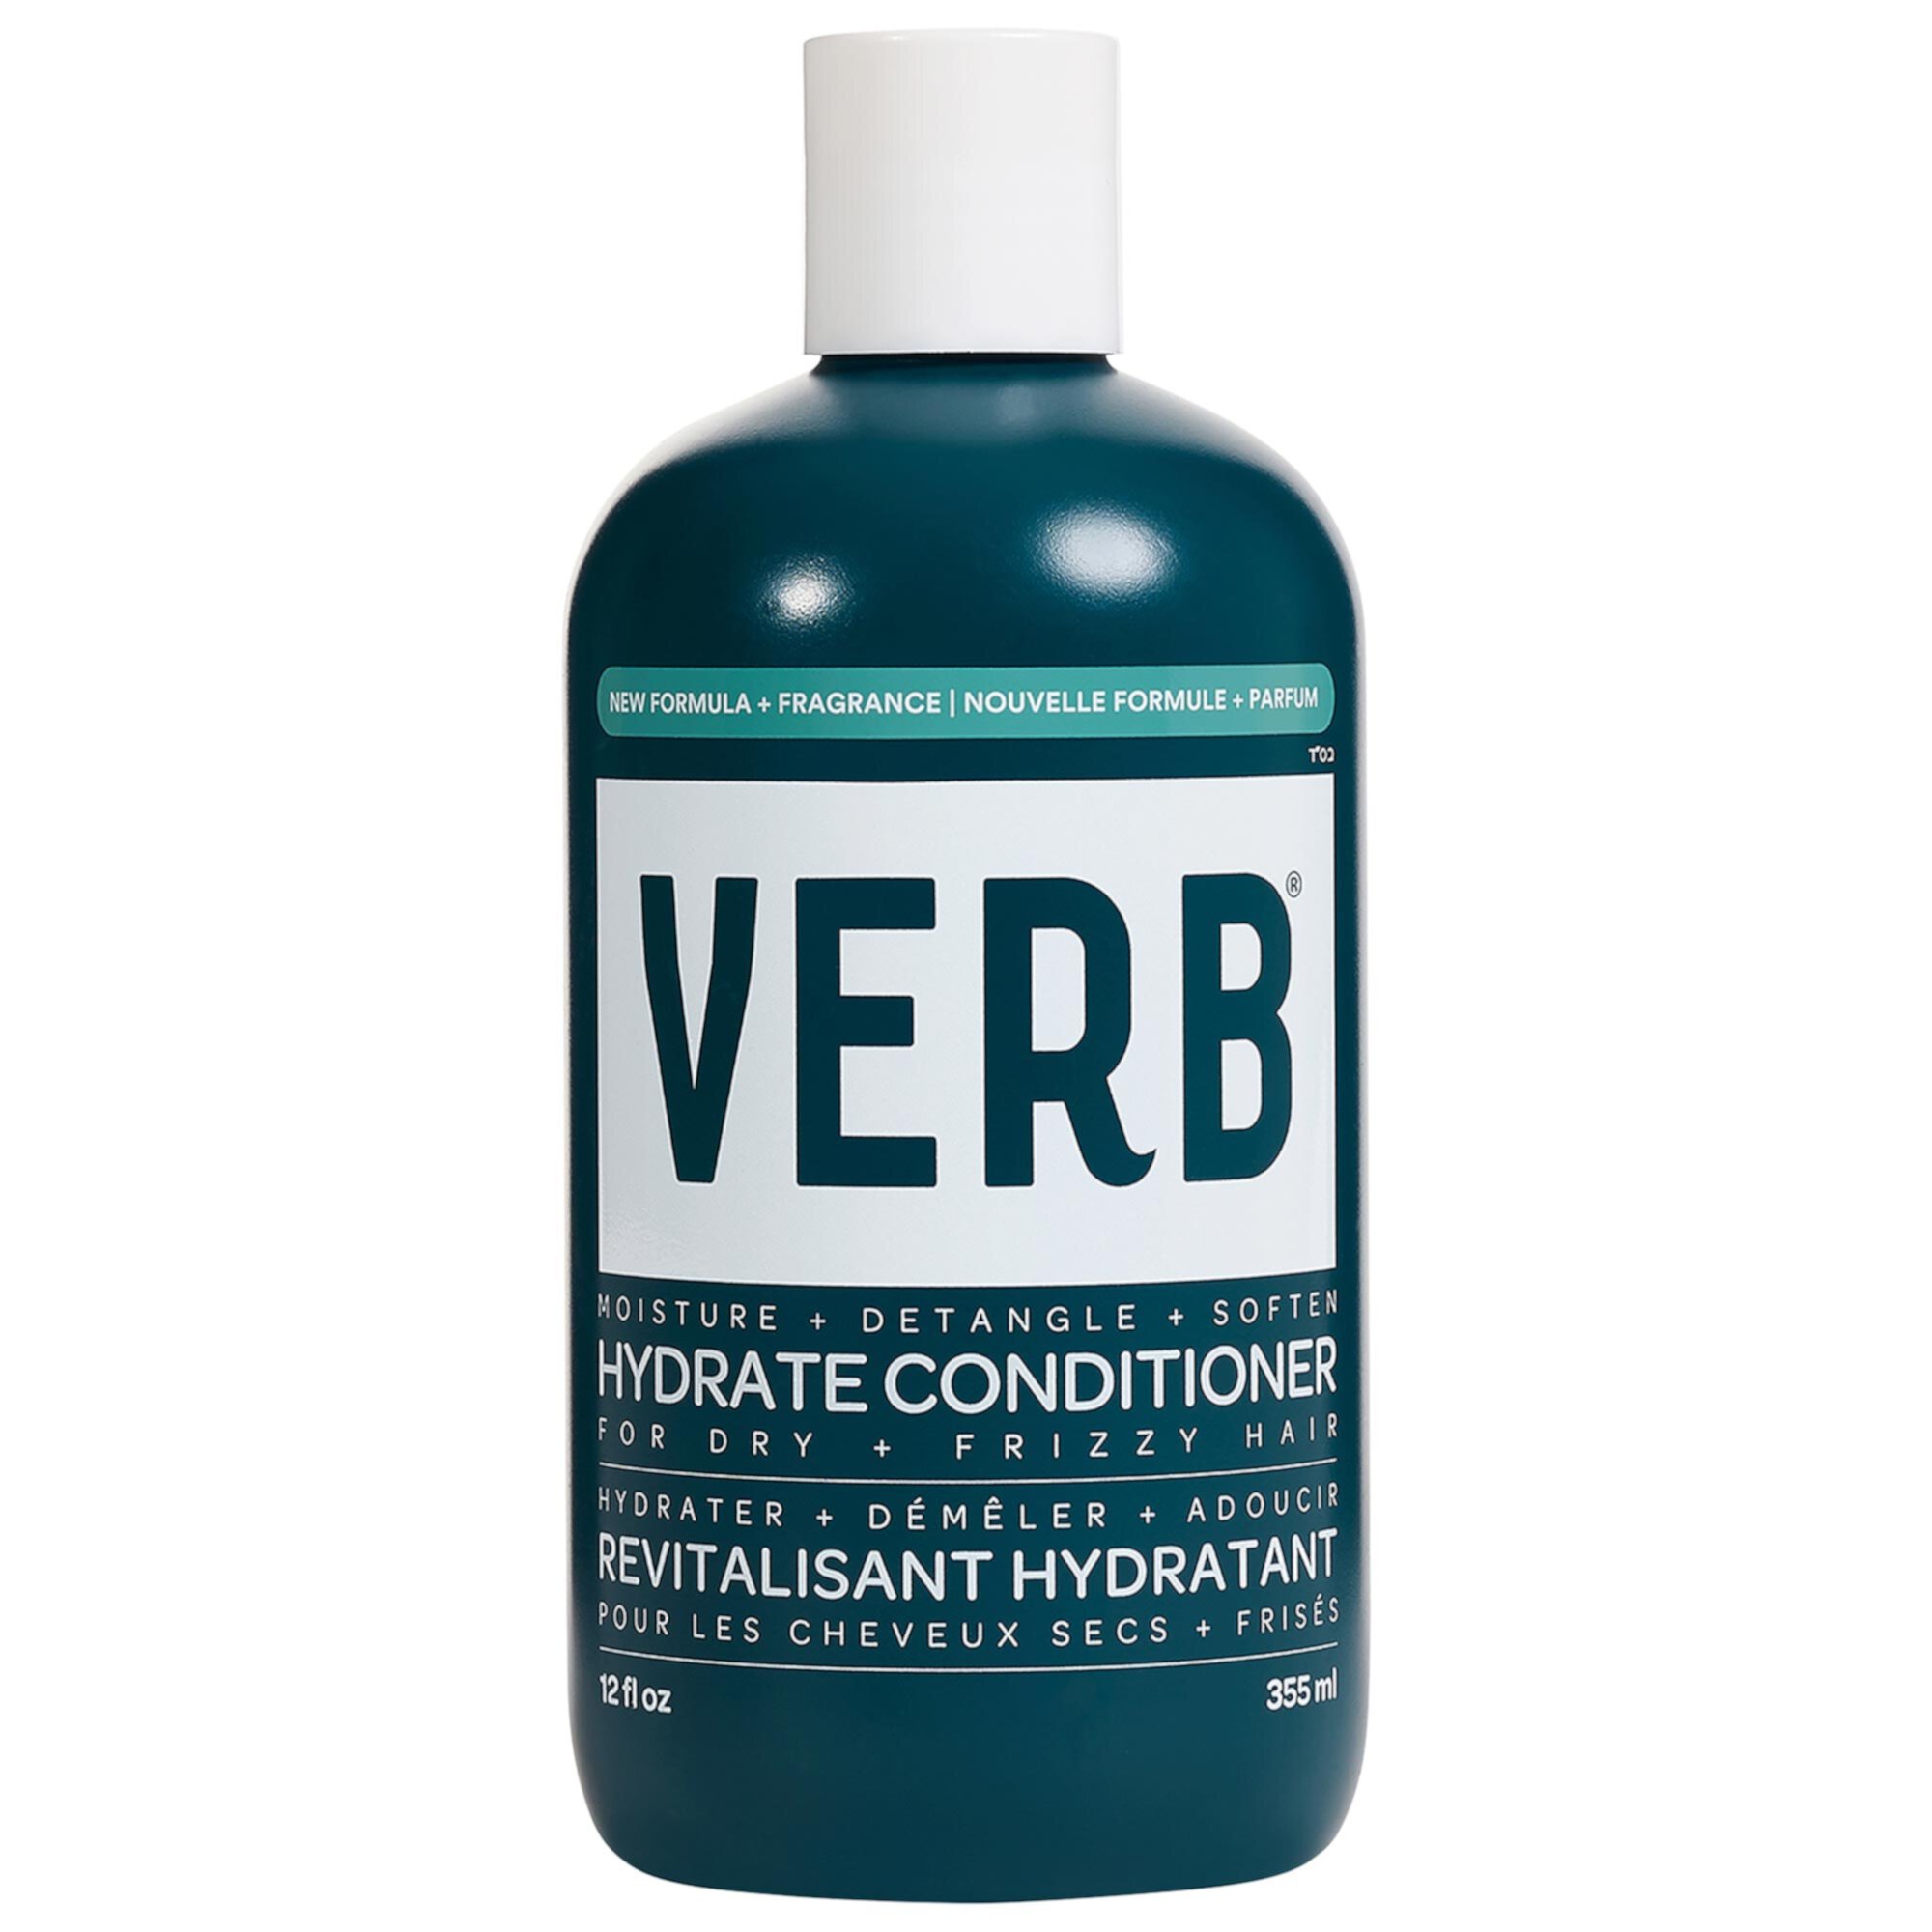 Hydrate Conditioner for Dry, Frizzy Hair Verb